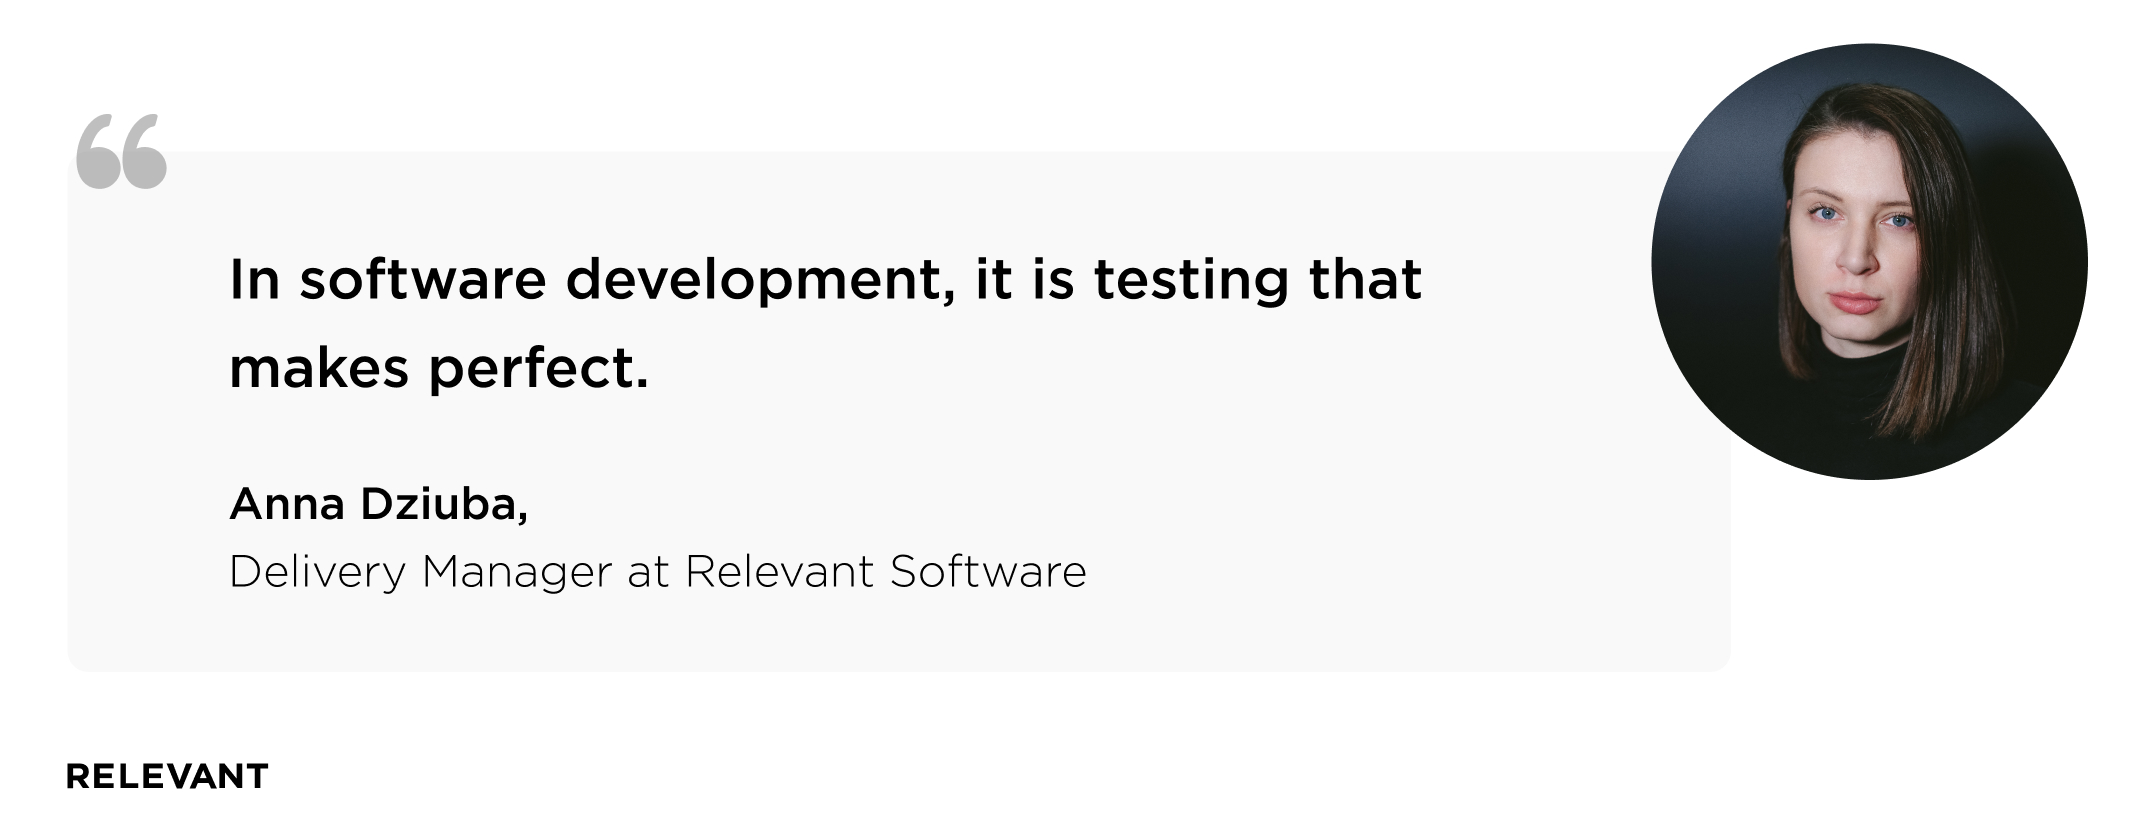 In software development, it is testing that makes perfect.